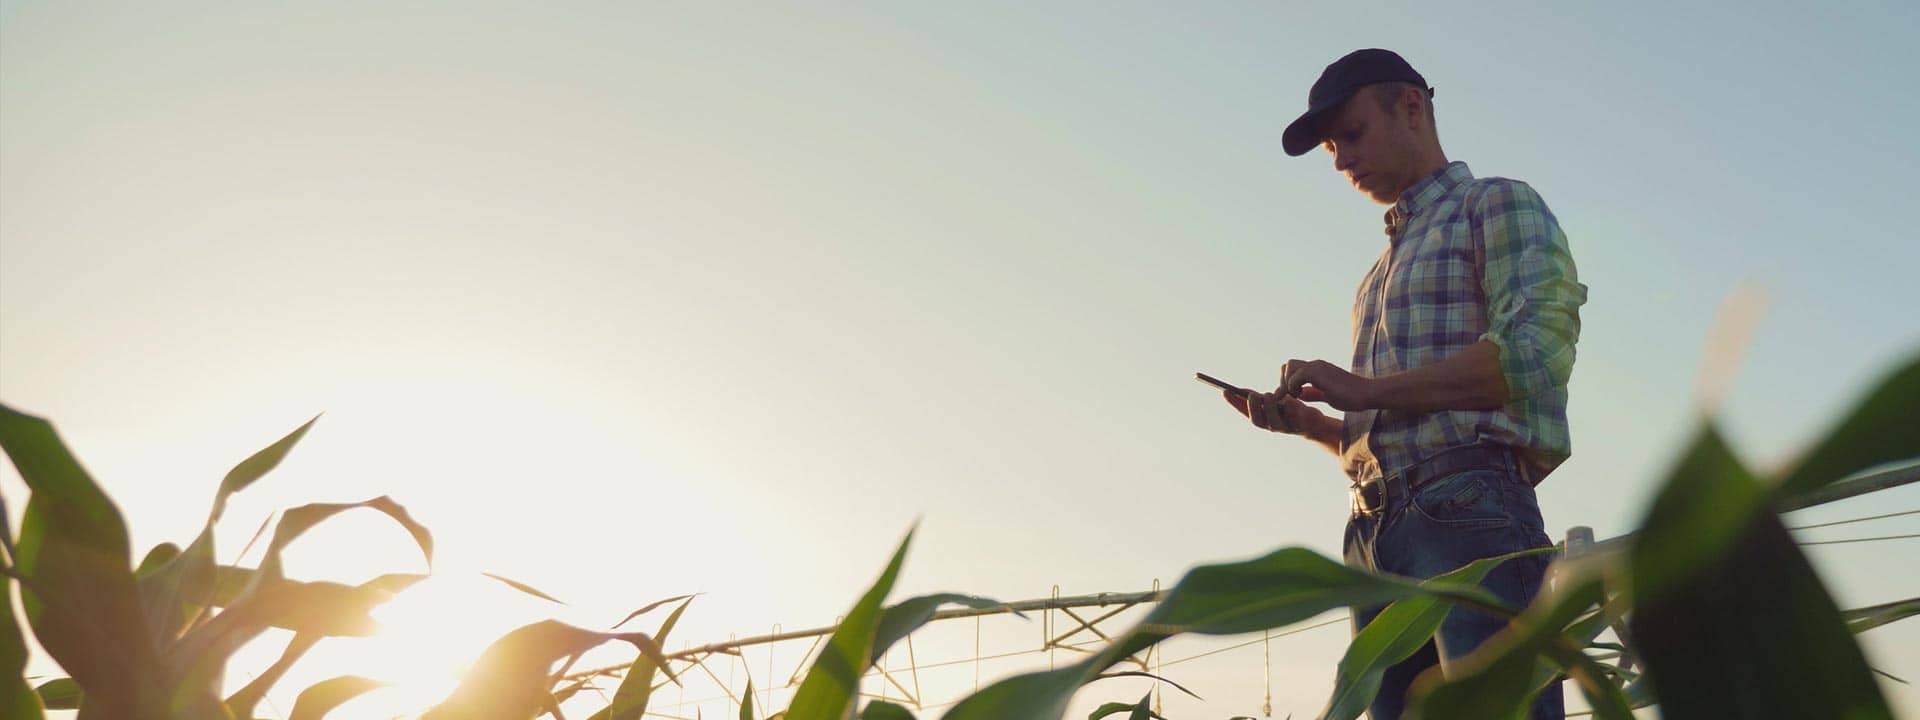 man standing in corn field with tablet